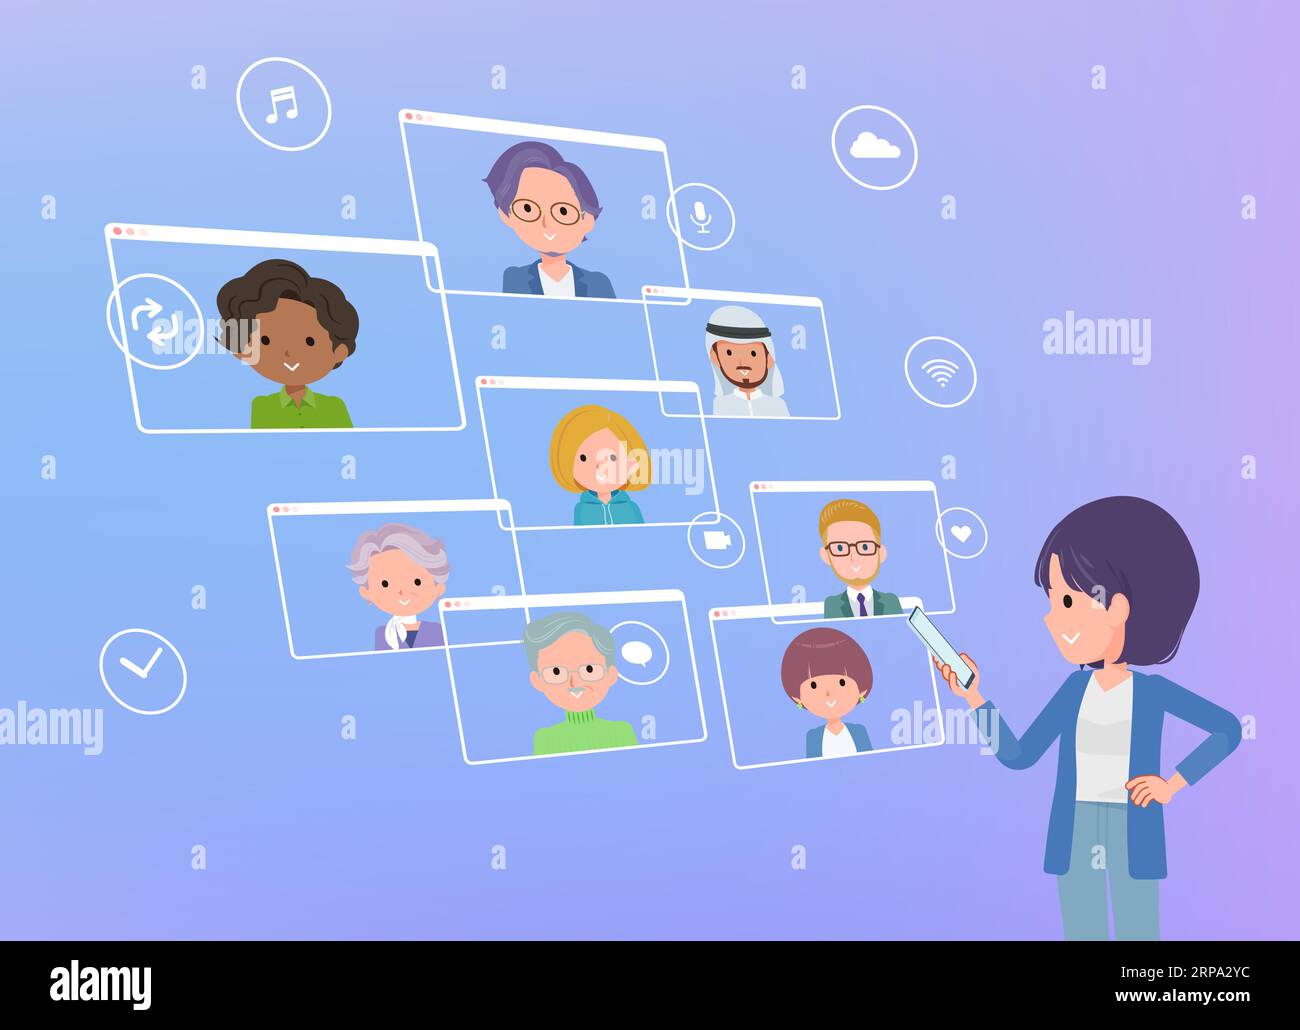 A set of Public relations women communicating online using a smartphone.It's vector art so easy to edit. Stock Vector